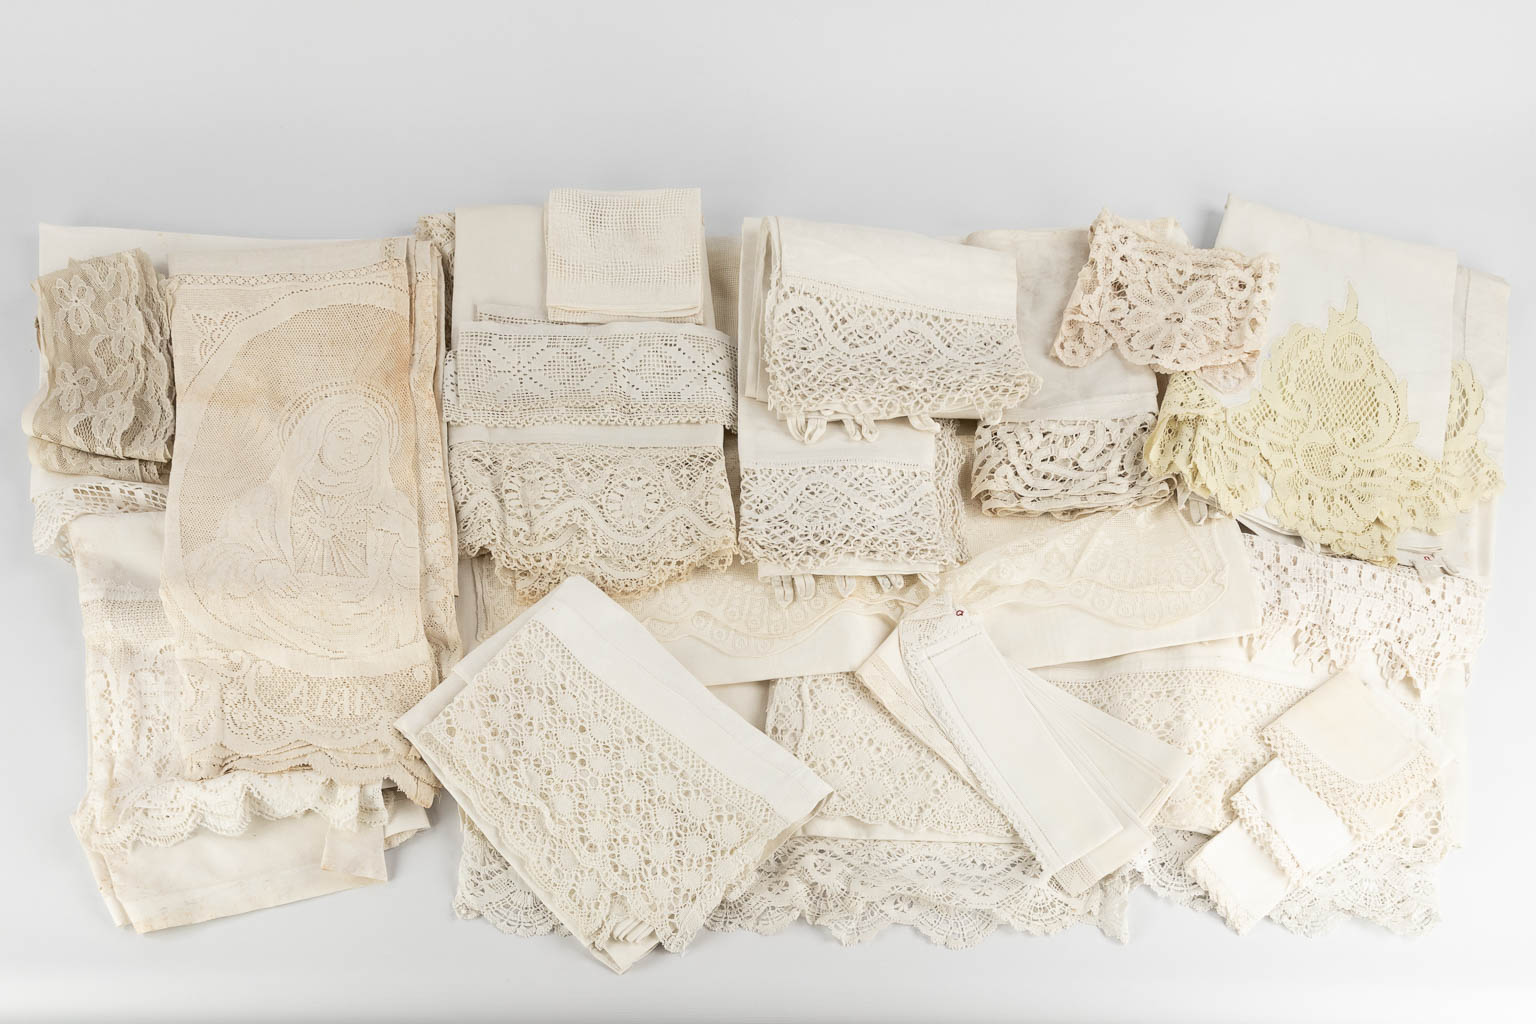 A large collection of textile and lace with Religious patterns and images. (W:380 x H:90 cm)